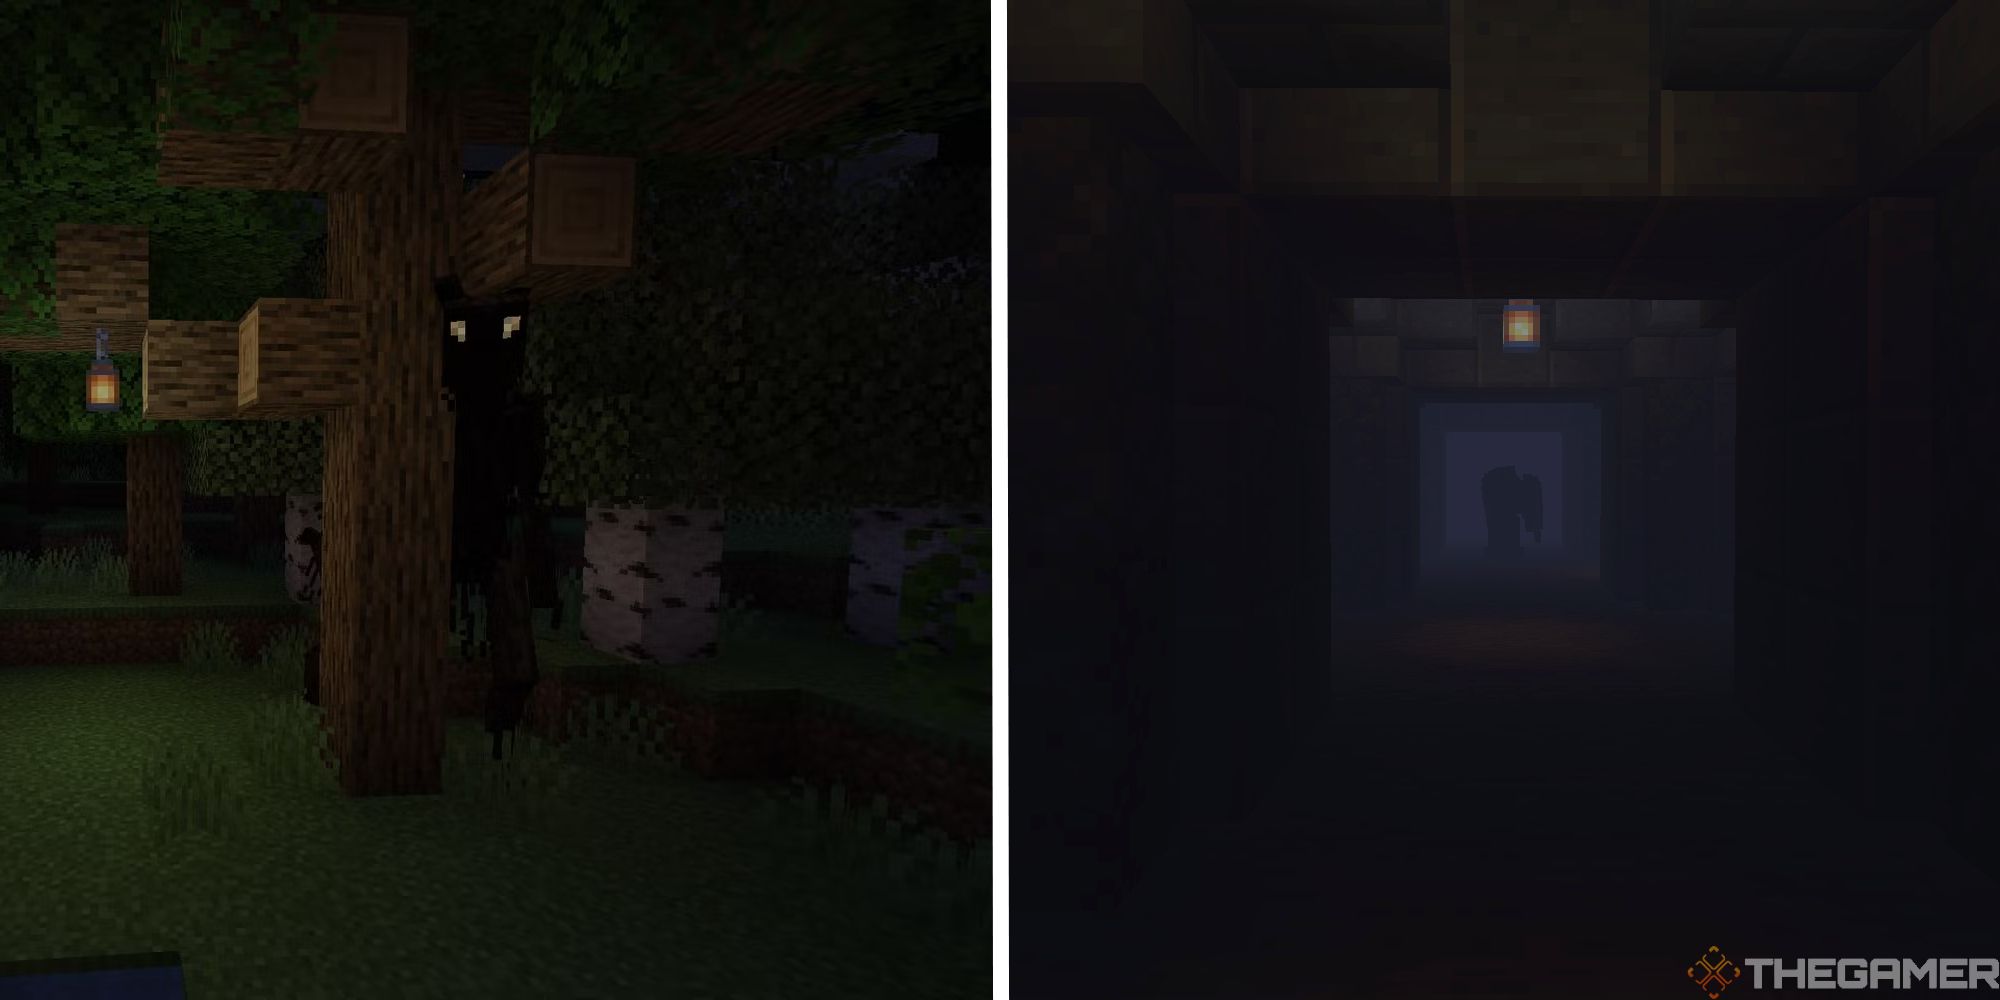 split image showing whisperwoods mod next to image of weeping angels mod